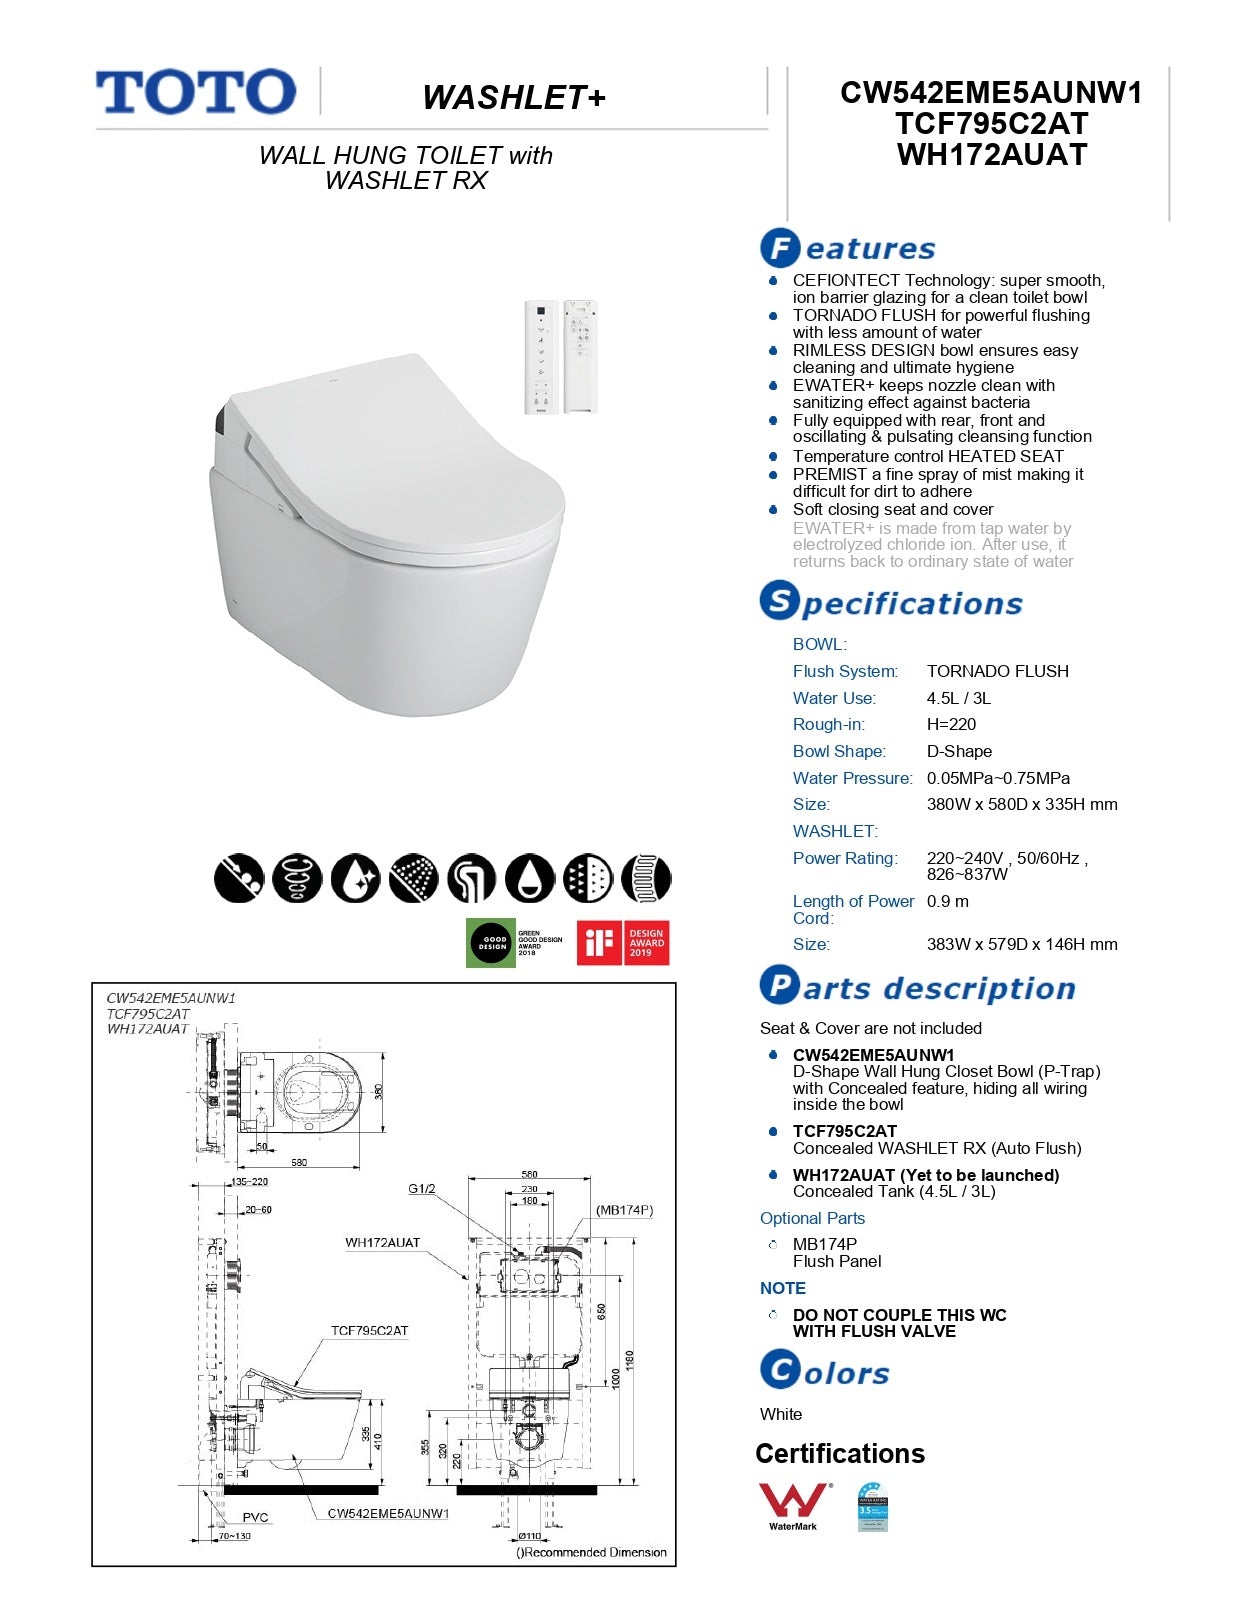 TOTO RX WALL HUNG TOILET WITH WASHLET W/ REMOTE CONTROL PACKAGE (D-SHAPE) GLOSS WHITE